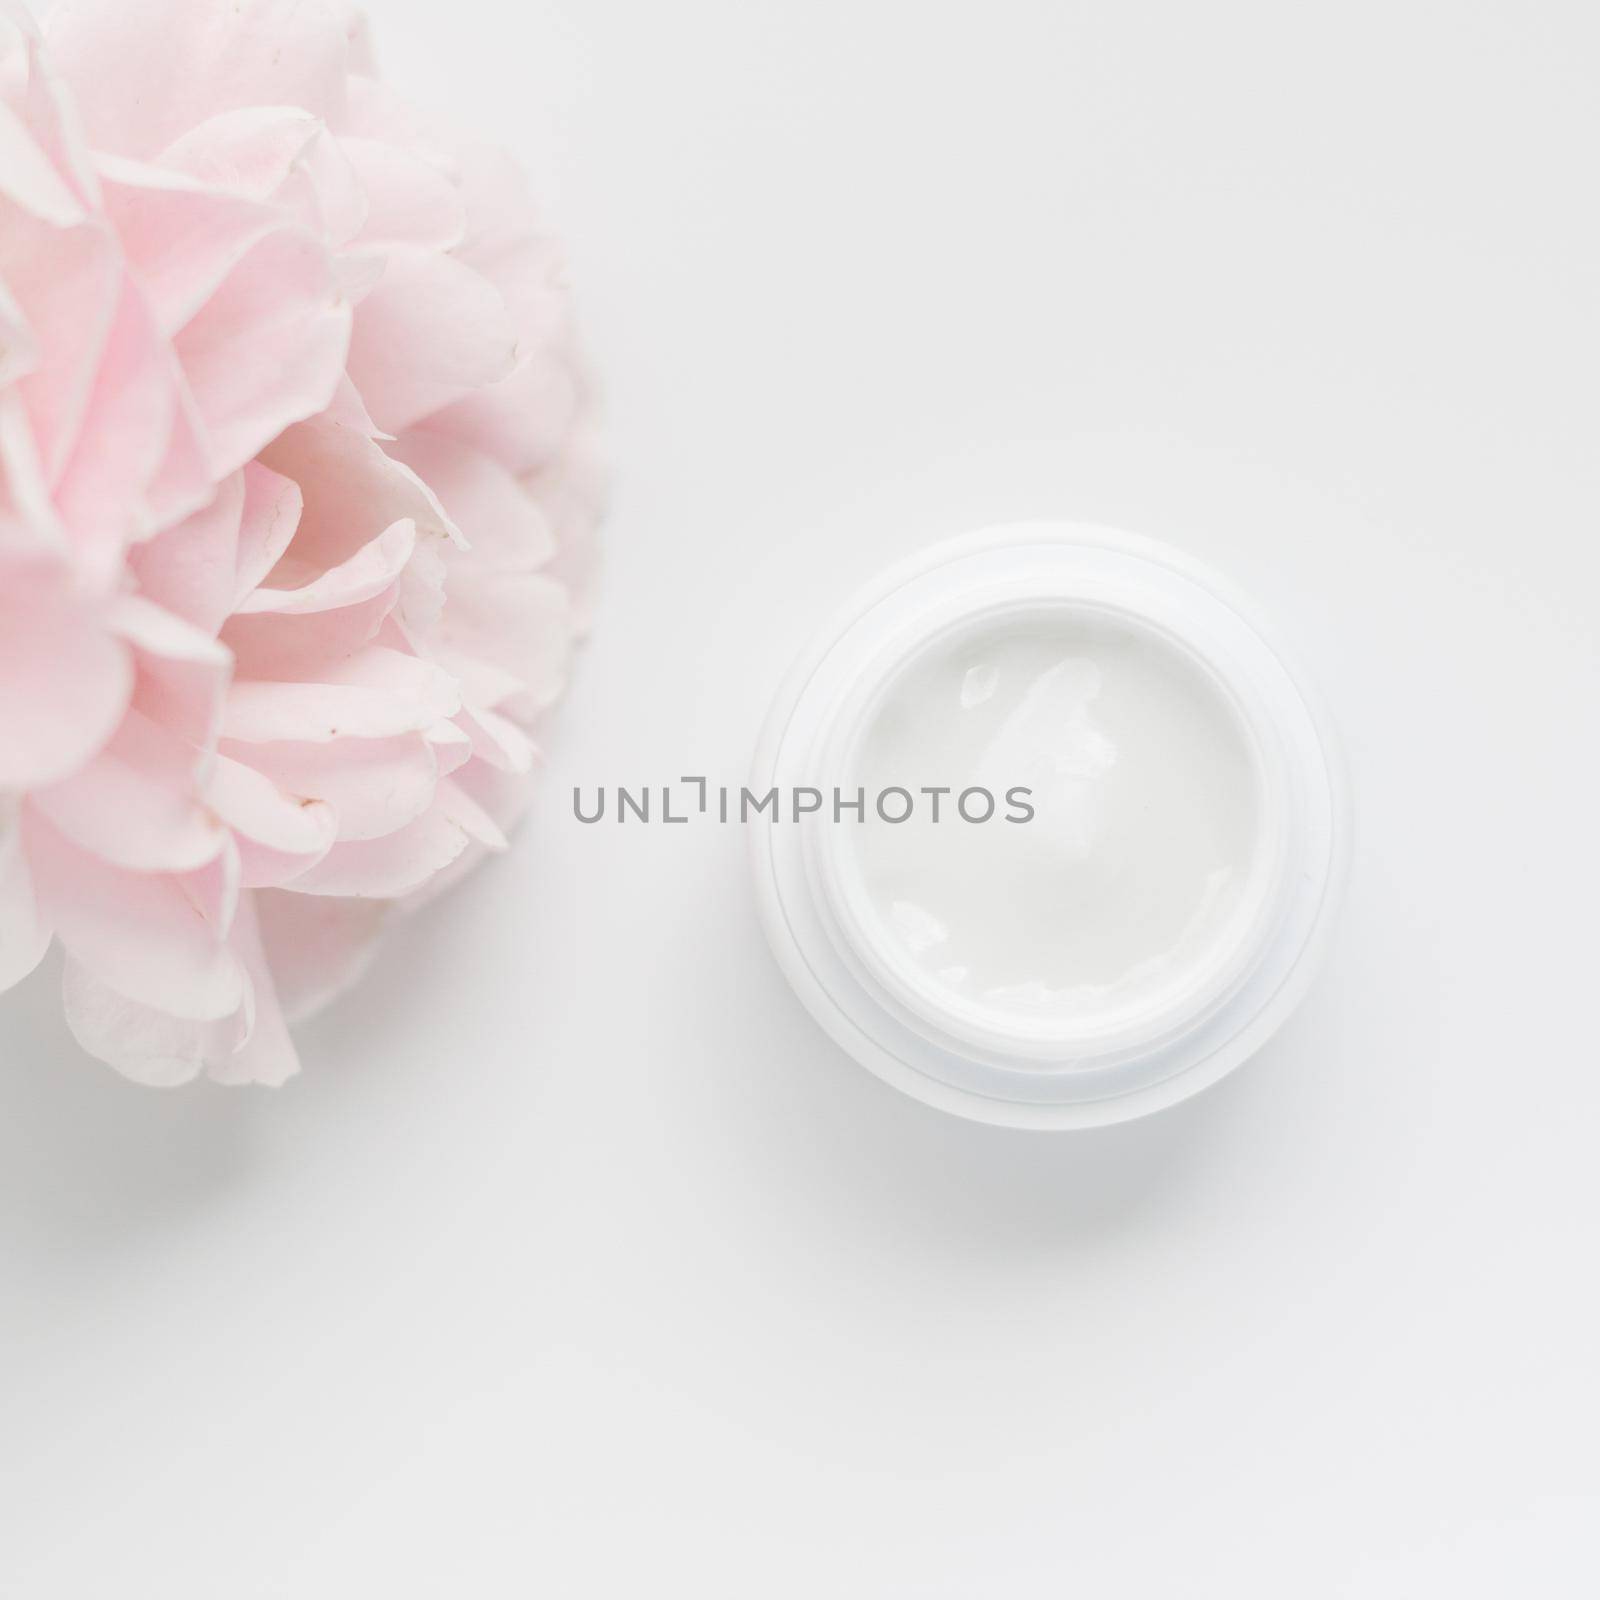 beauty cream jar and rose petals - cosmetics with flowers styled concept